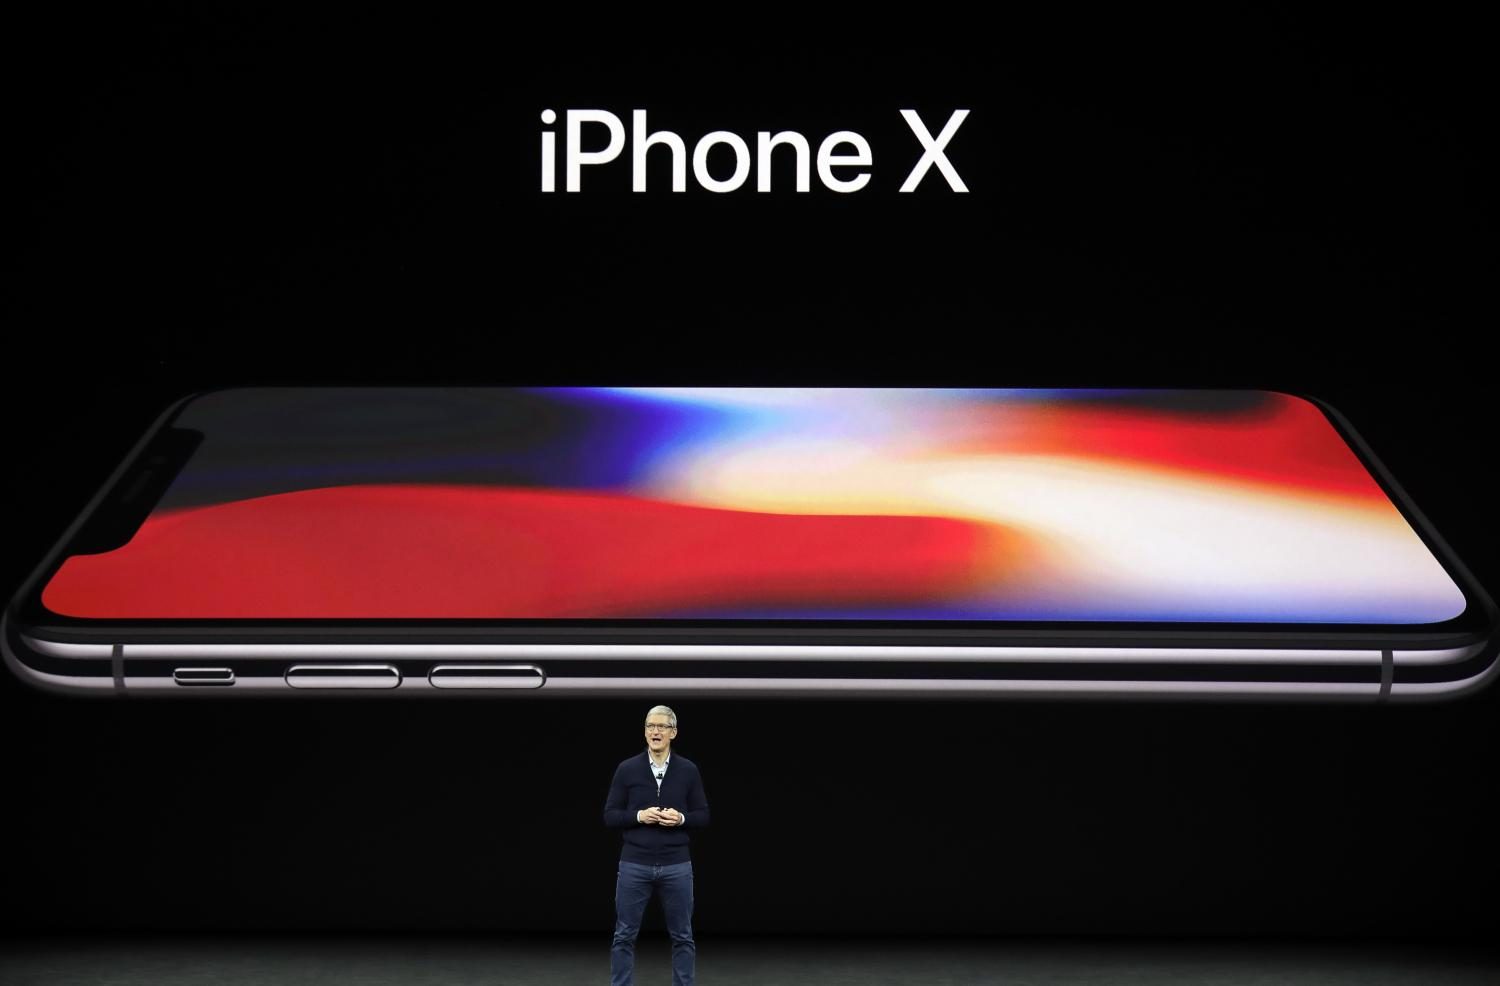 Apple CEO Tim Cook announces the arrival of iPhone X in early September.